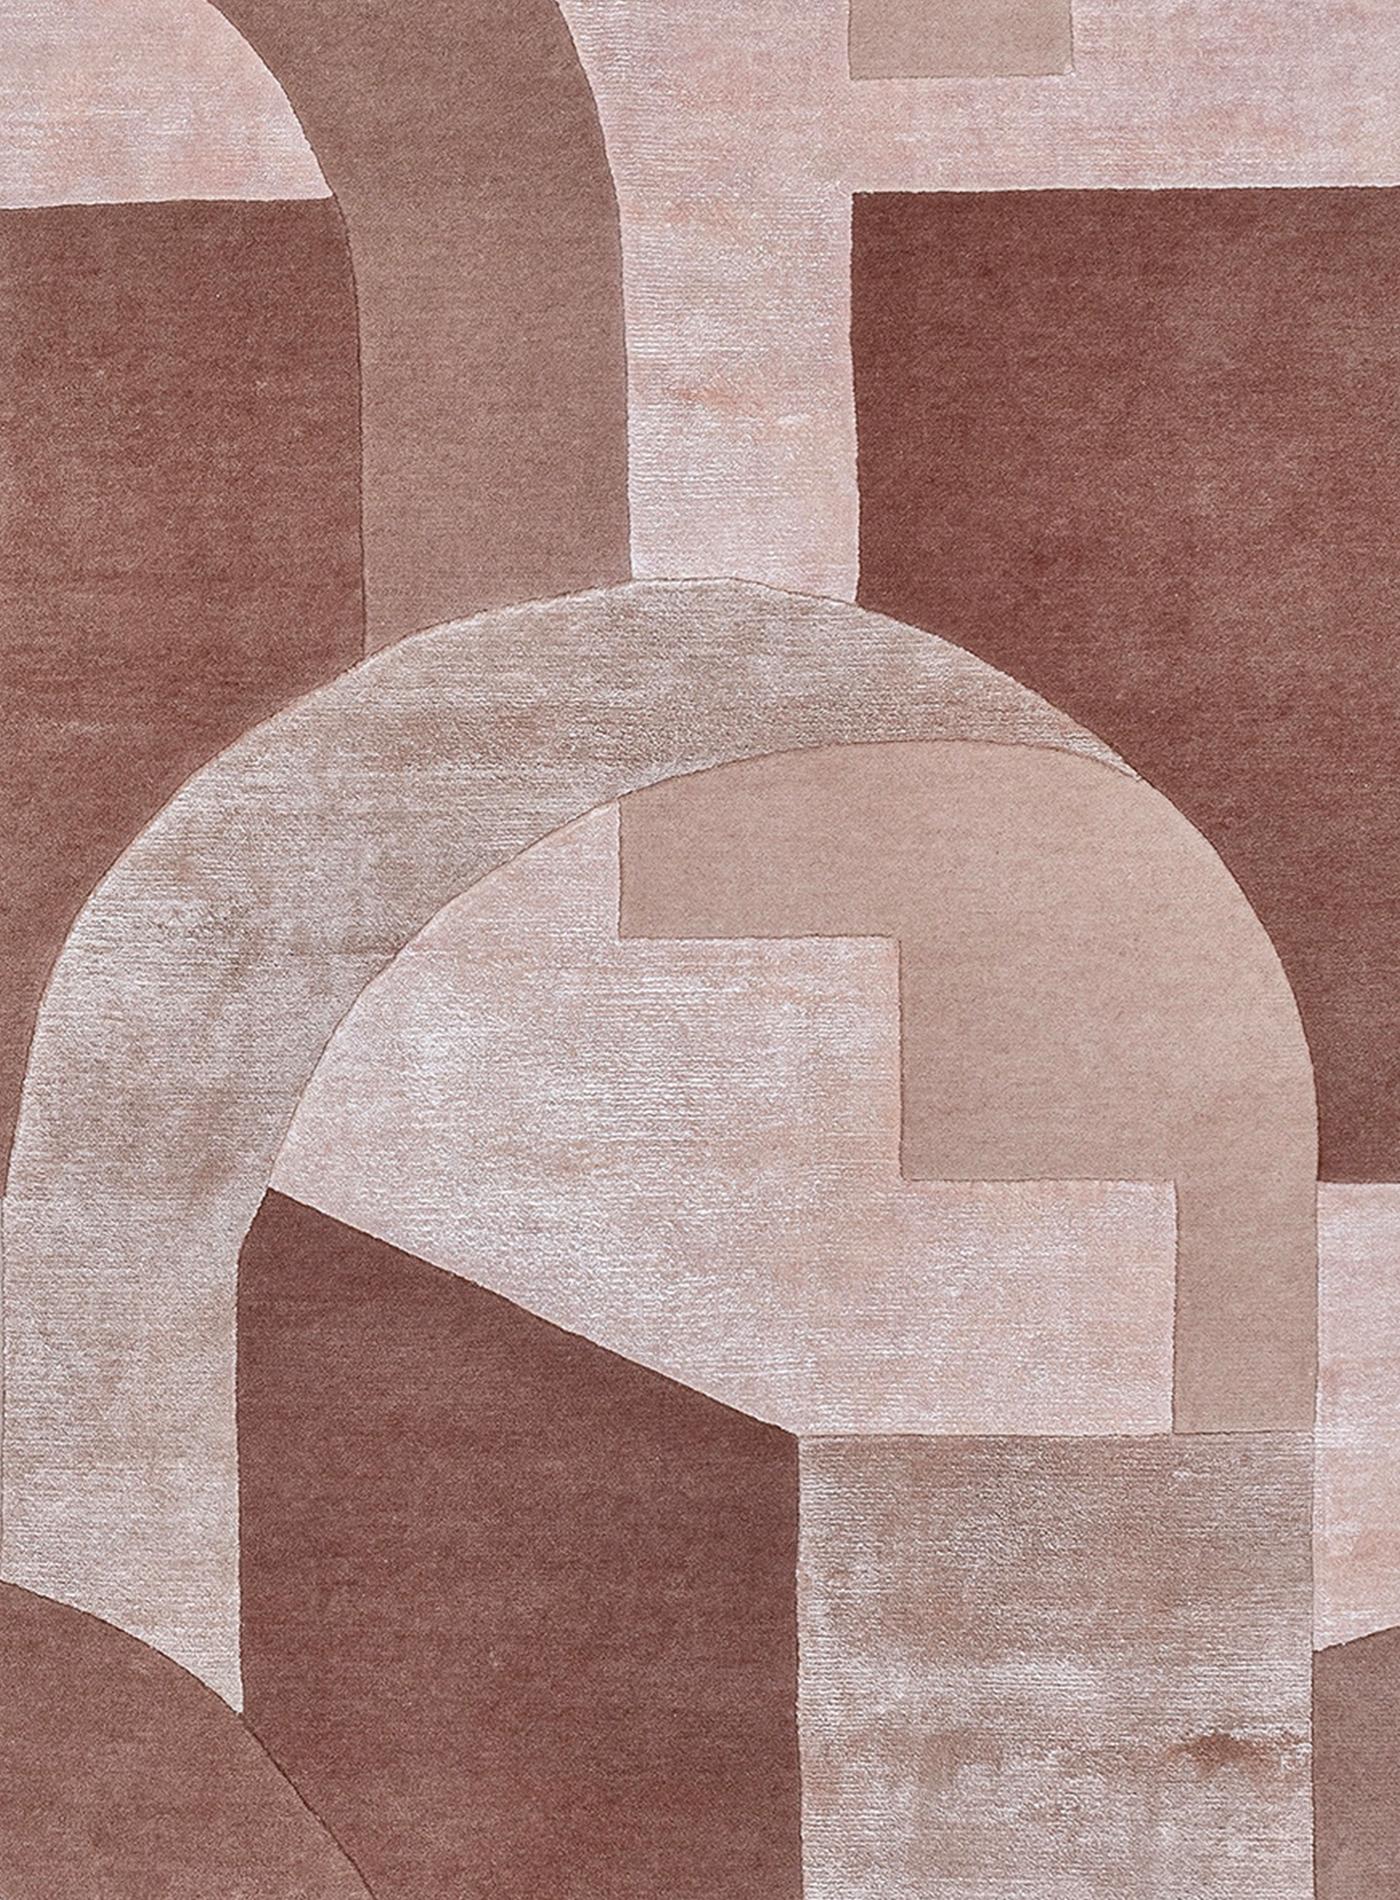 The Chirico rug is a graphic manifestation of classical architecture reinterpreted through a contemporary surrealist lens. Applying signature elements of my work into a complex and unworldly space, inspired by the buildings of Ricardo Bofill, Xavier